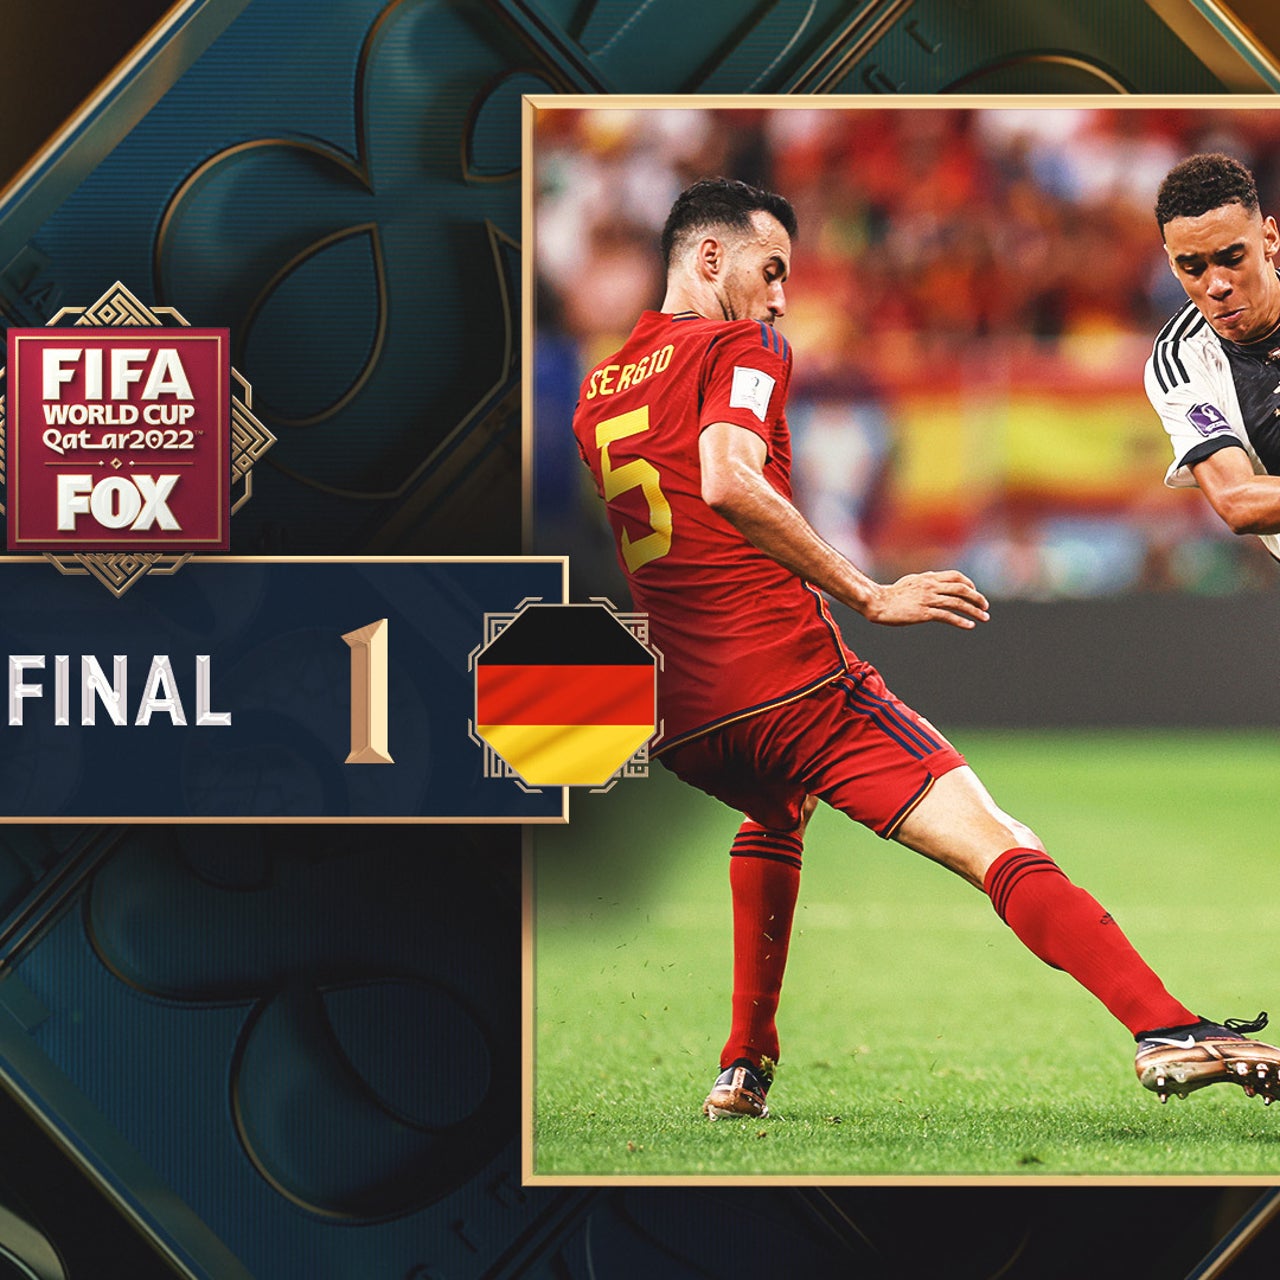 World Cup 2022 highlights Spain, Germany battle to 1-1 tie FOX Sports